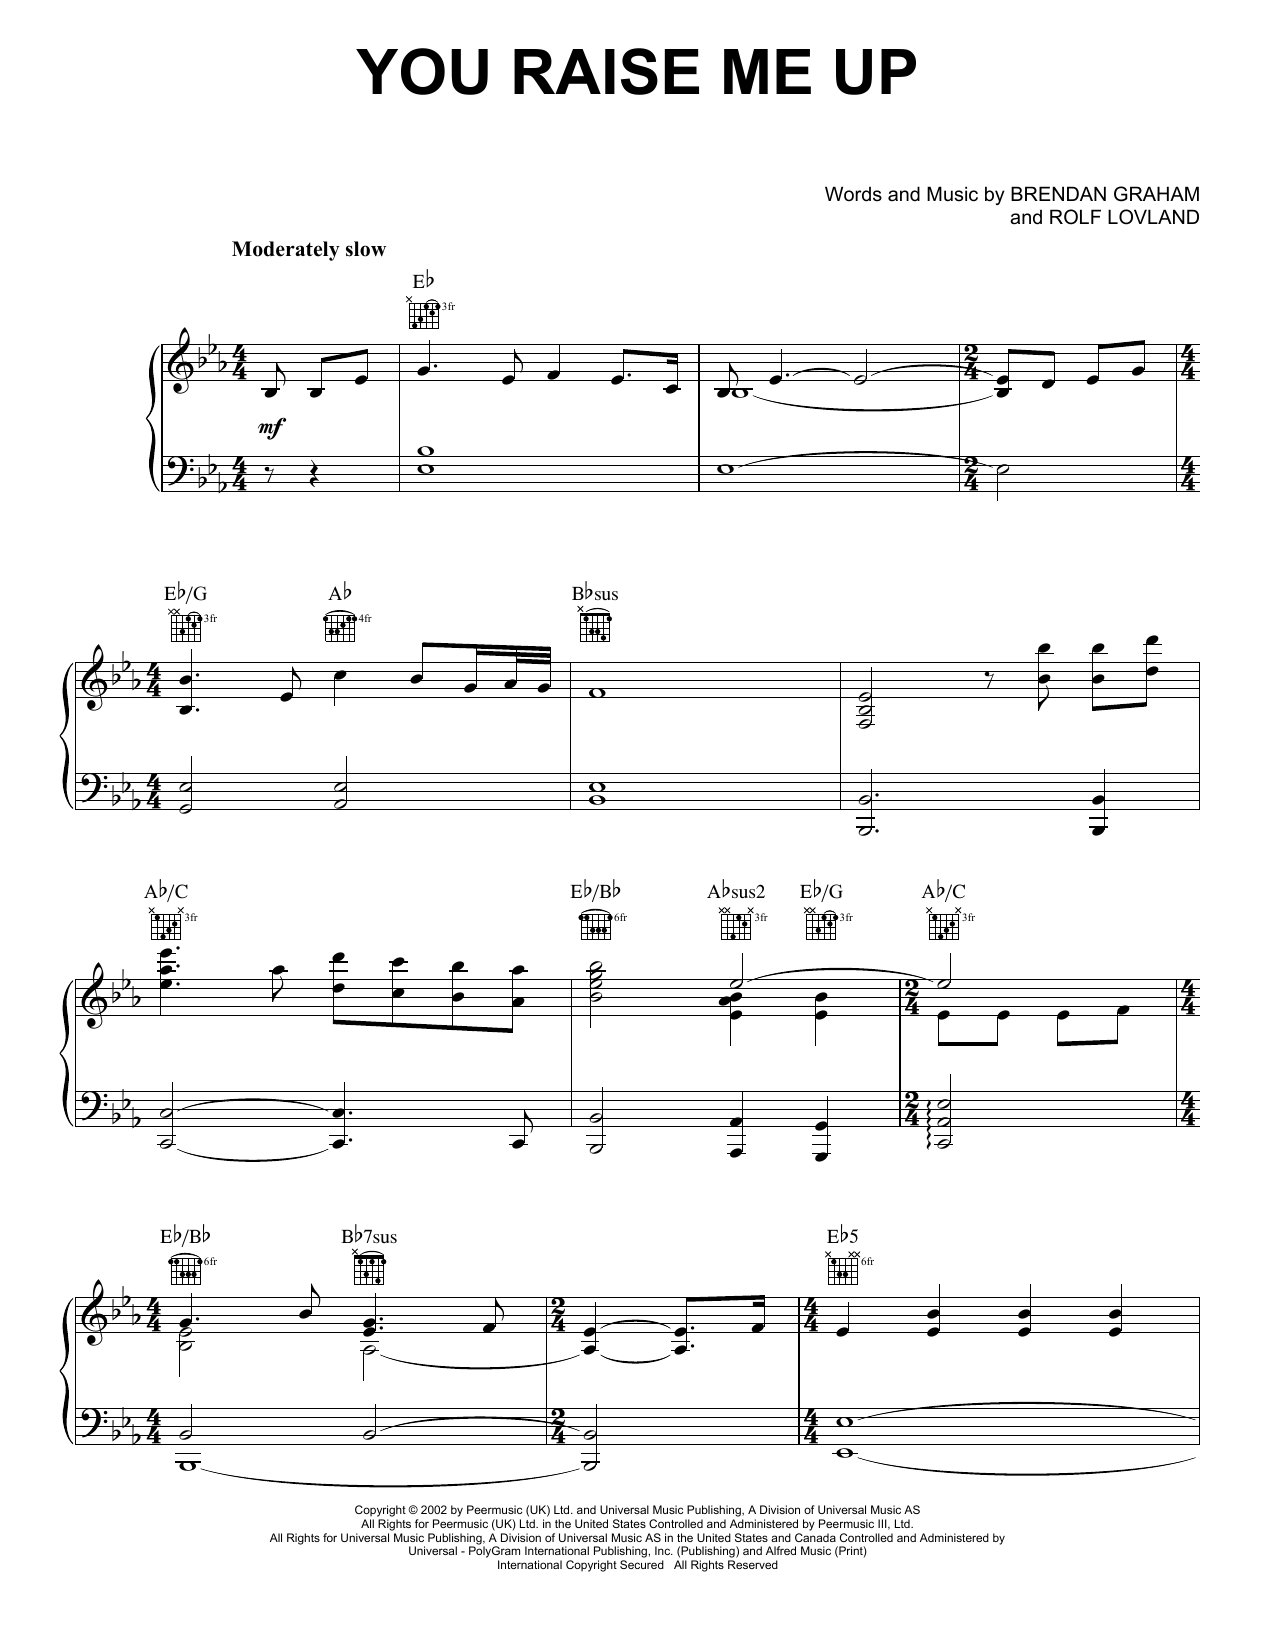 Josh Groban You Raise Me Up sheet music preview music notes and score for Piano including 5 page(s)